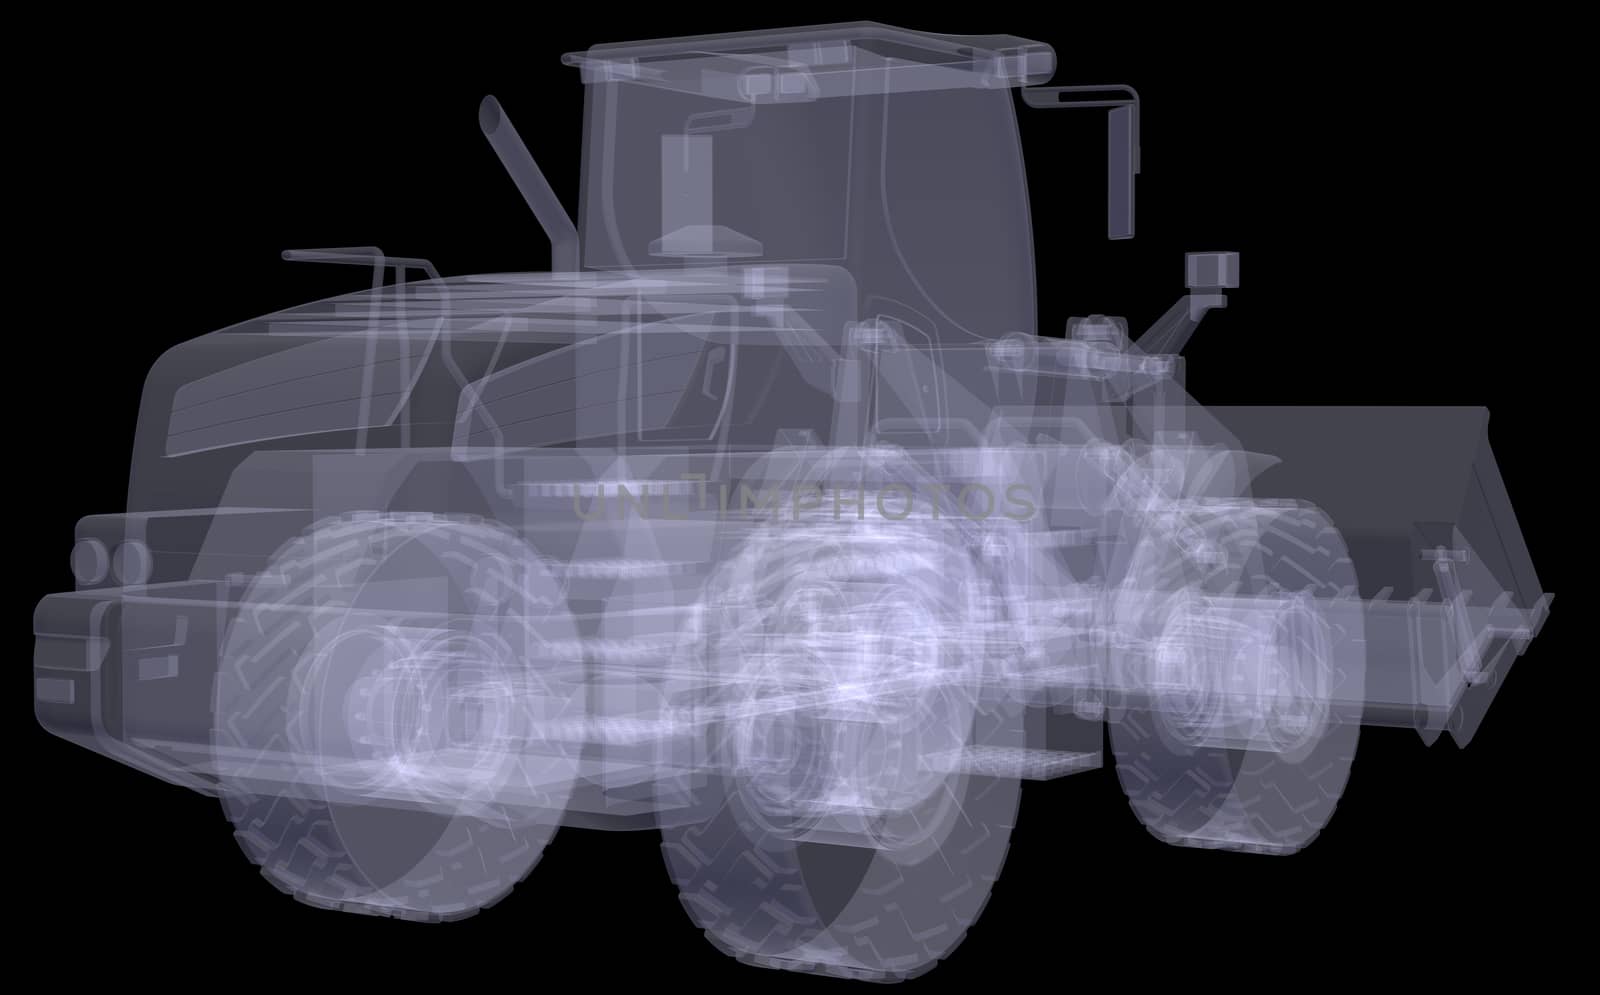 Wheel loader. X-ray render isolated on black background